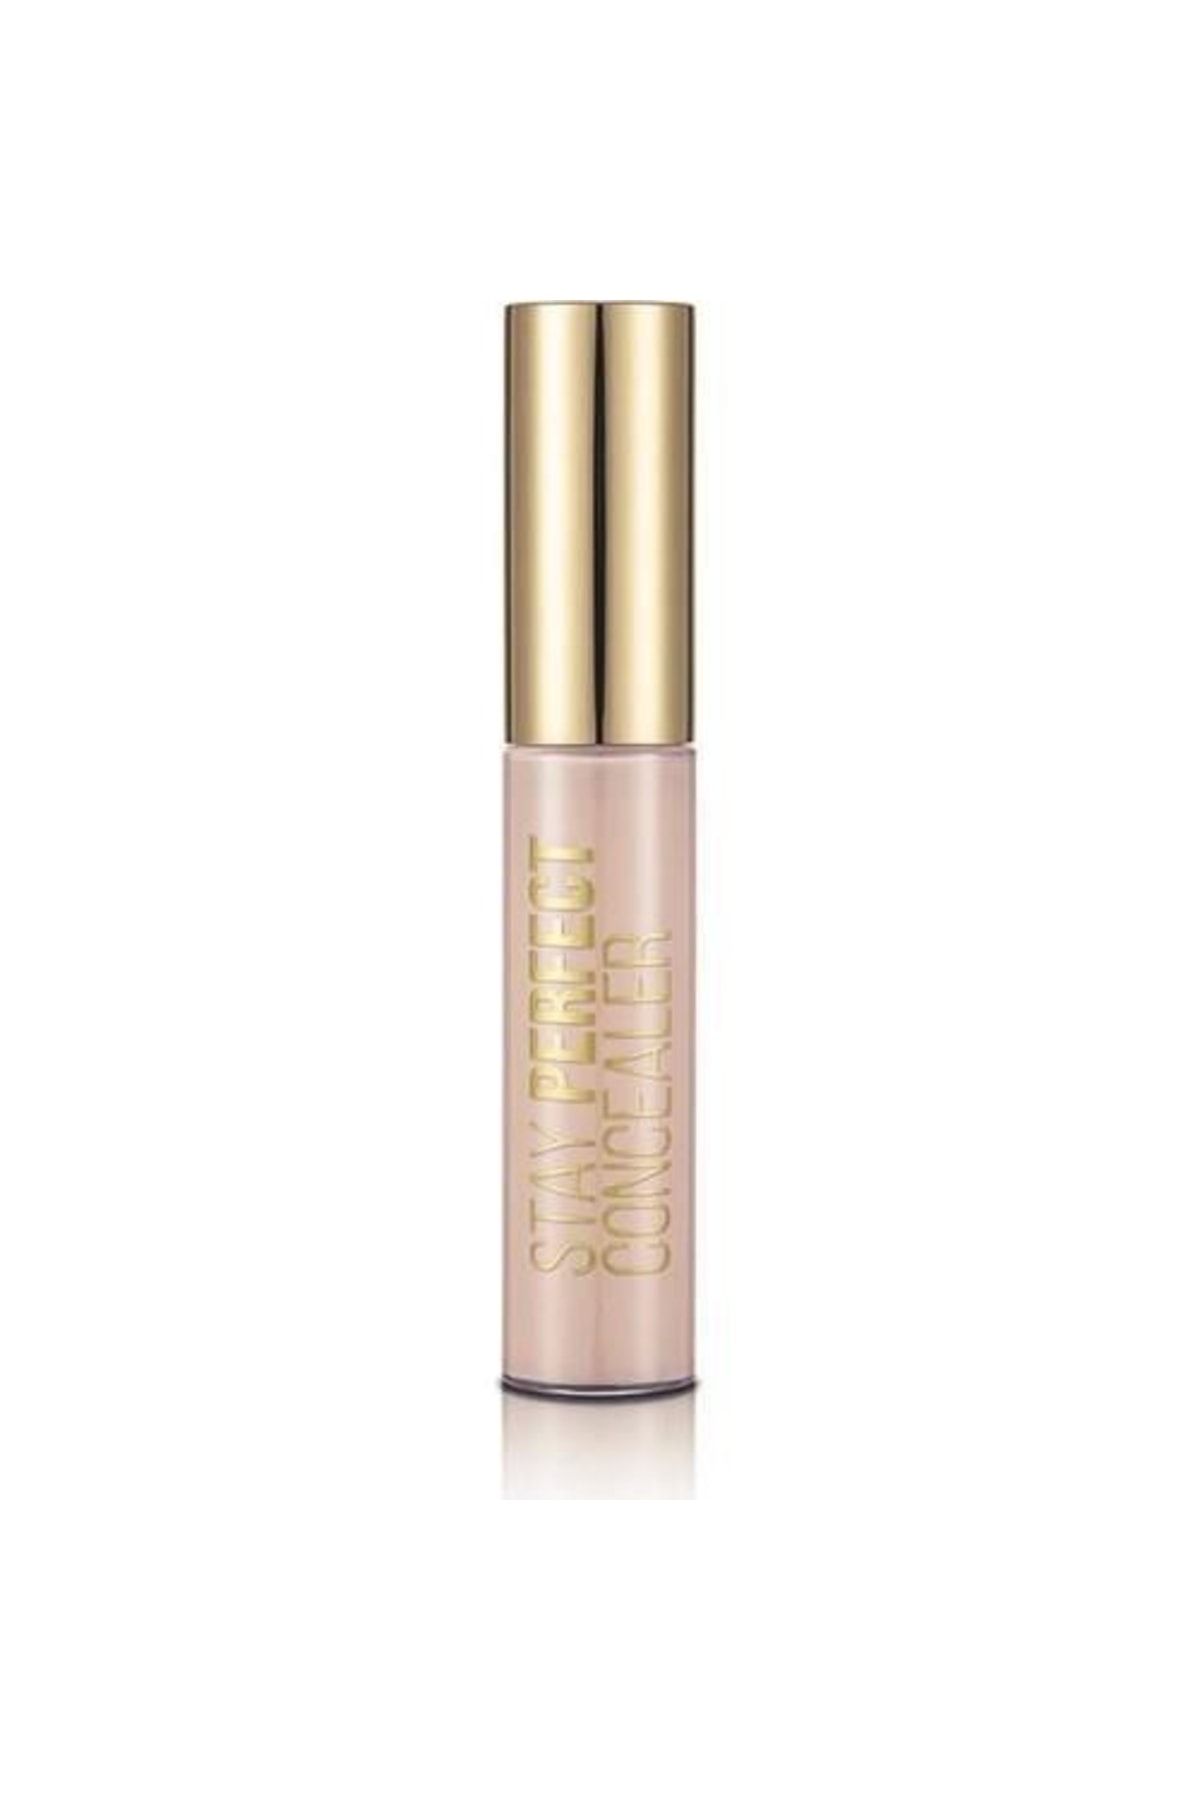 Flormar Stay Perfect Likit Concealer 04 Ivory